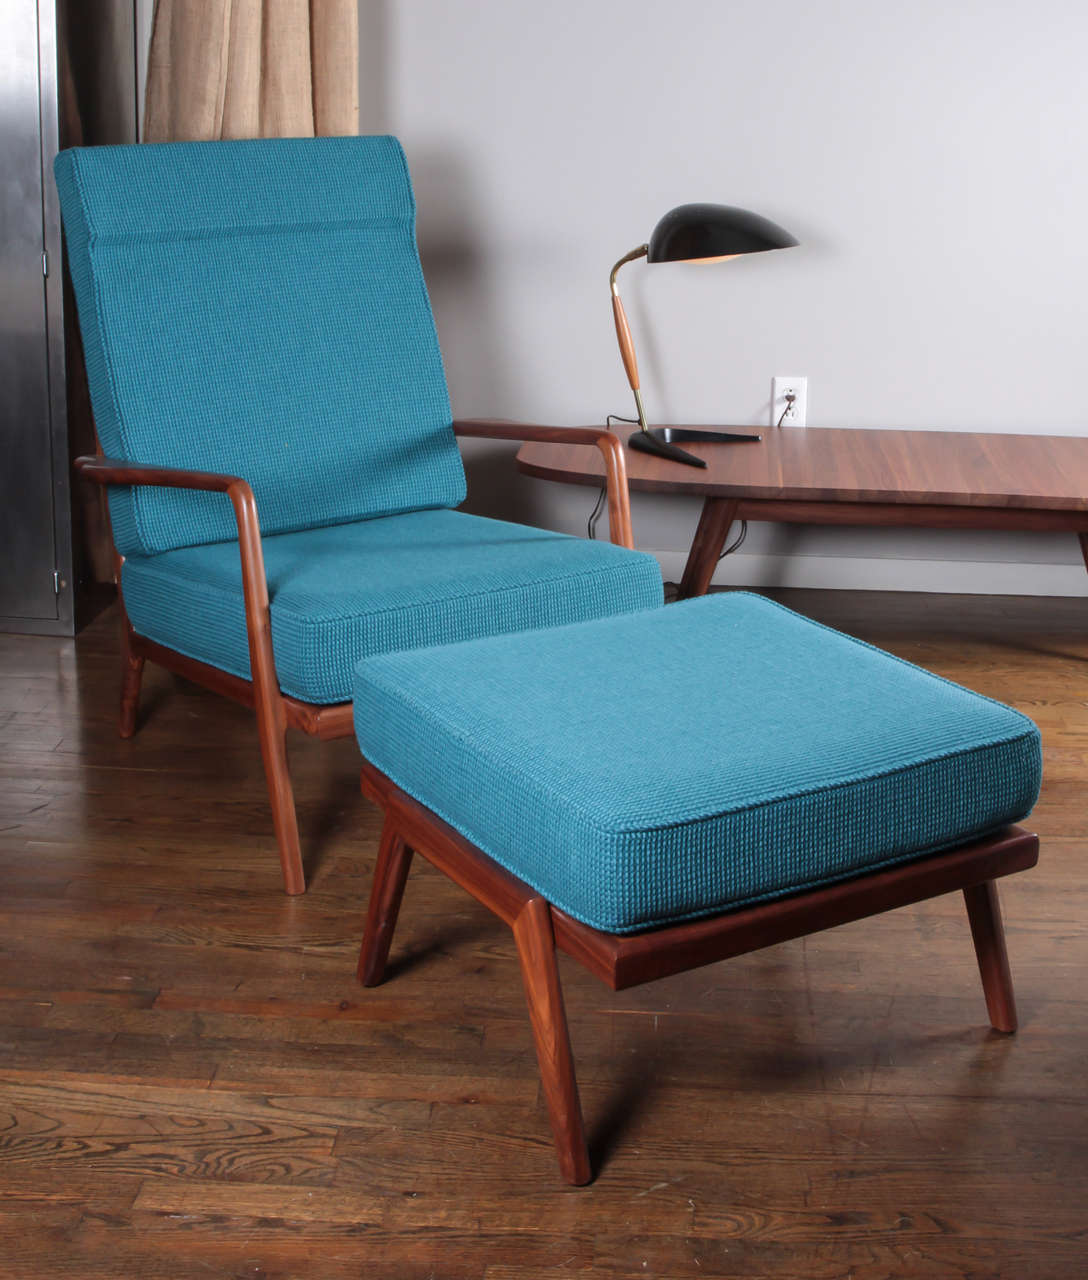 Vintage solid walnut framed lounge chair (ottoman is sold)  with upholstered seat and sculpted back cushions, by Mel Smilow, 1950. Price below is for individual chair with cushions in Knoll fabric.  Blue ottoman cushion comes with the chair but not